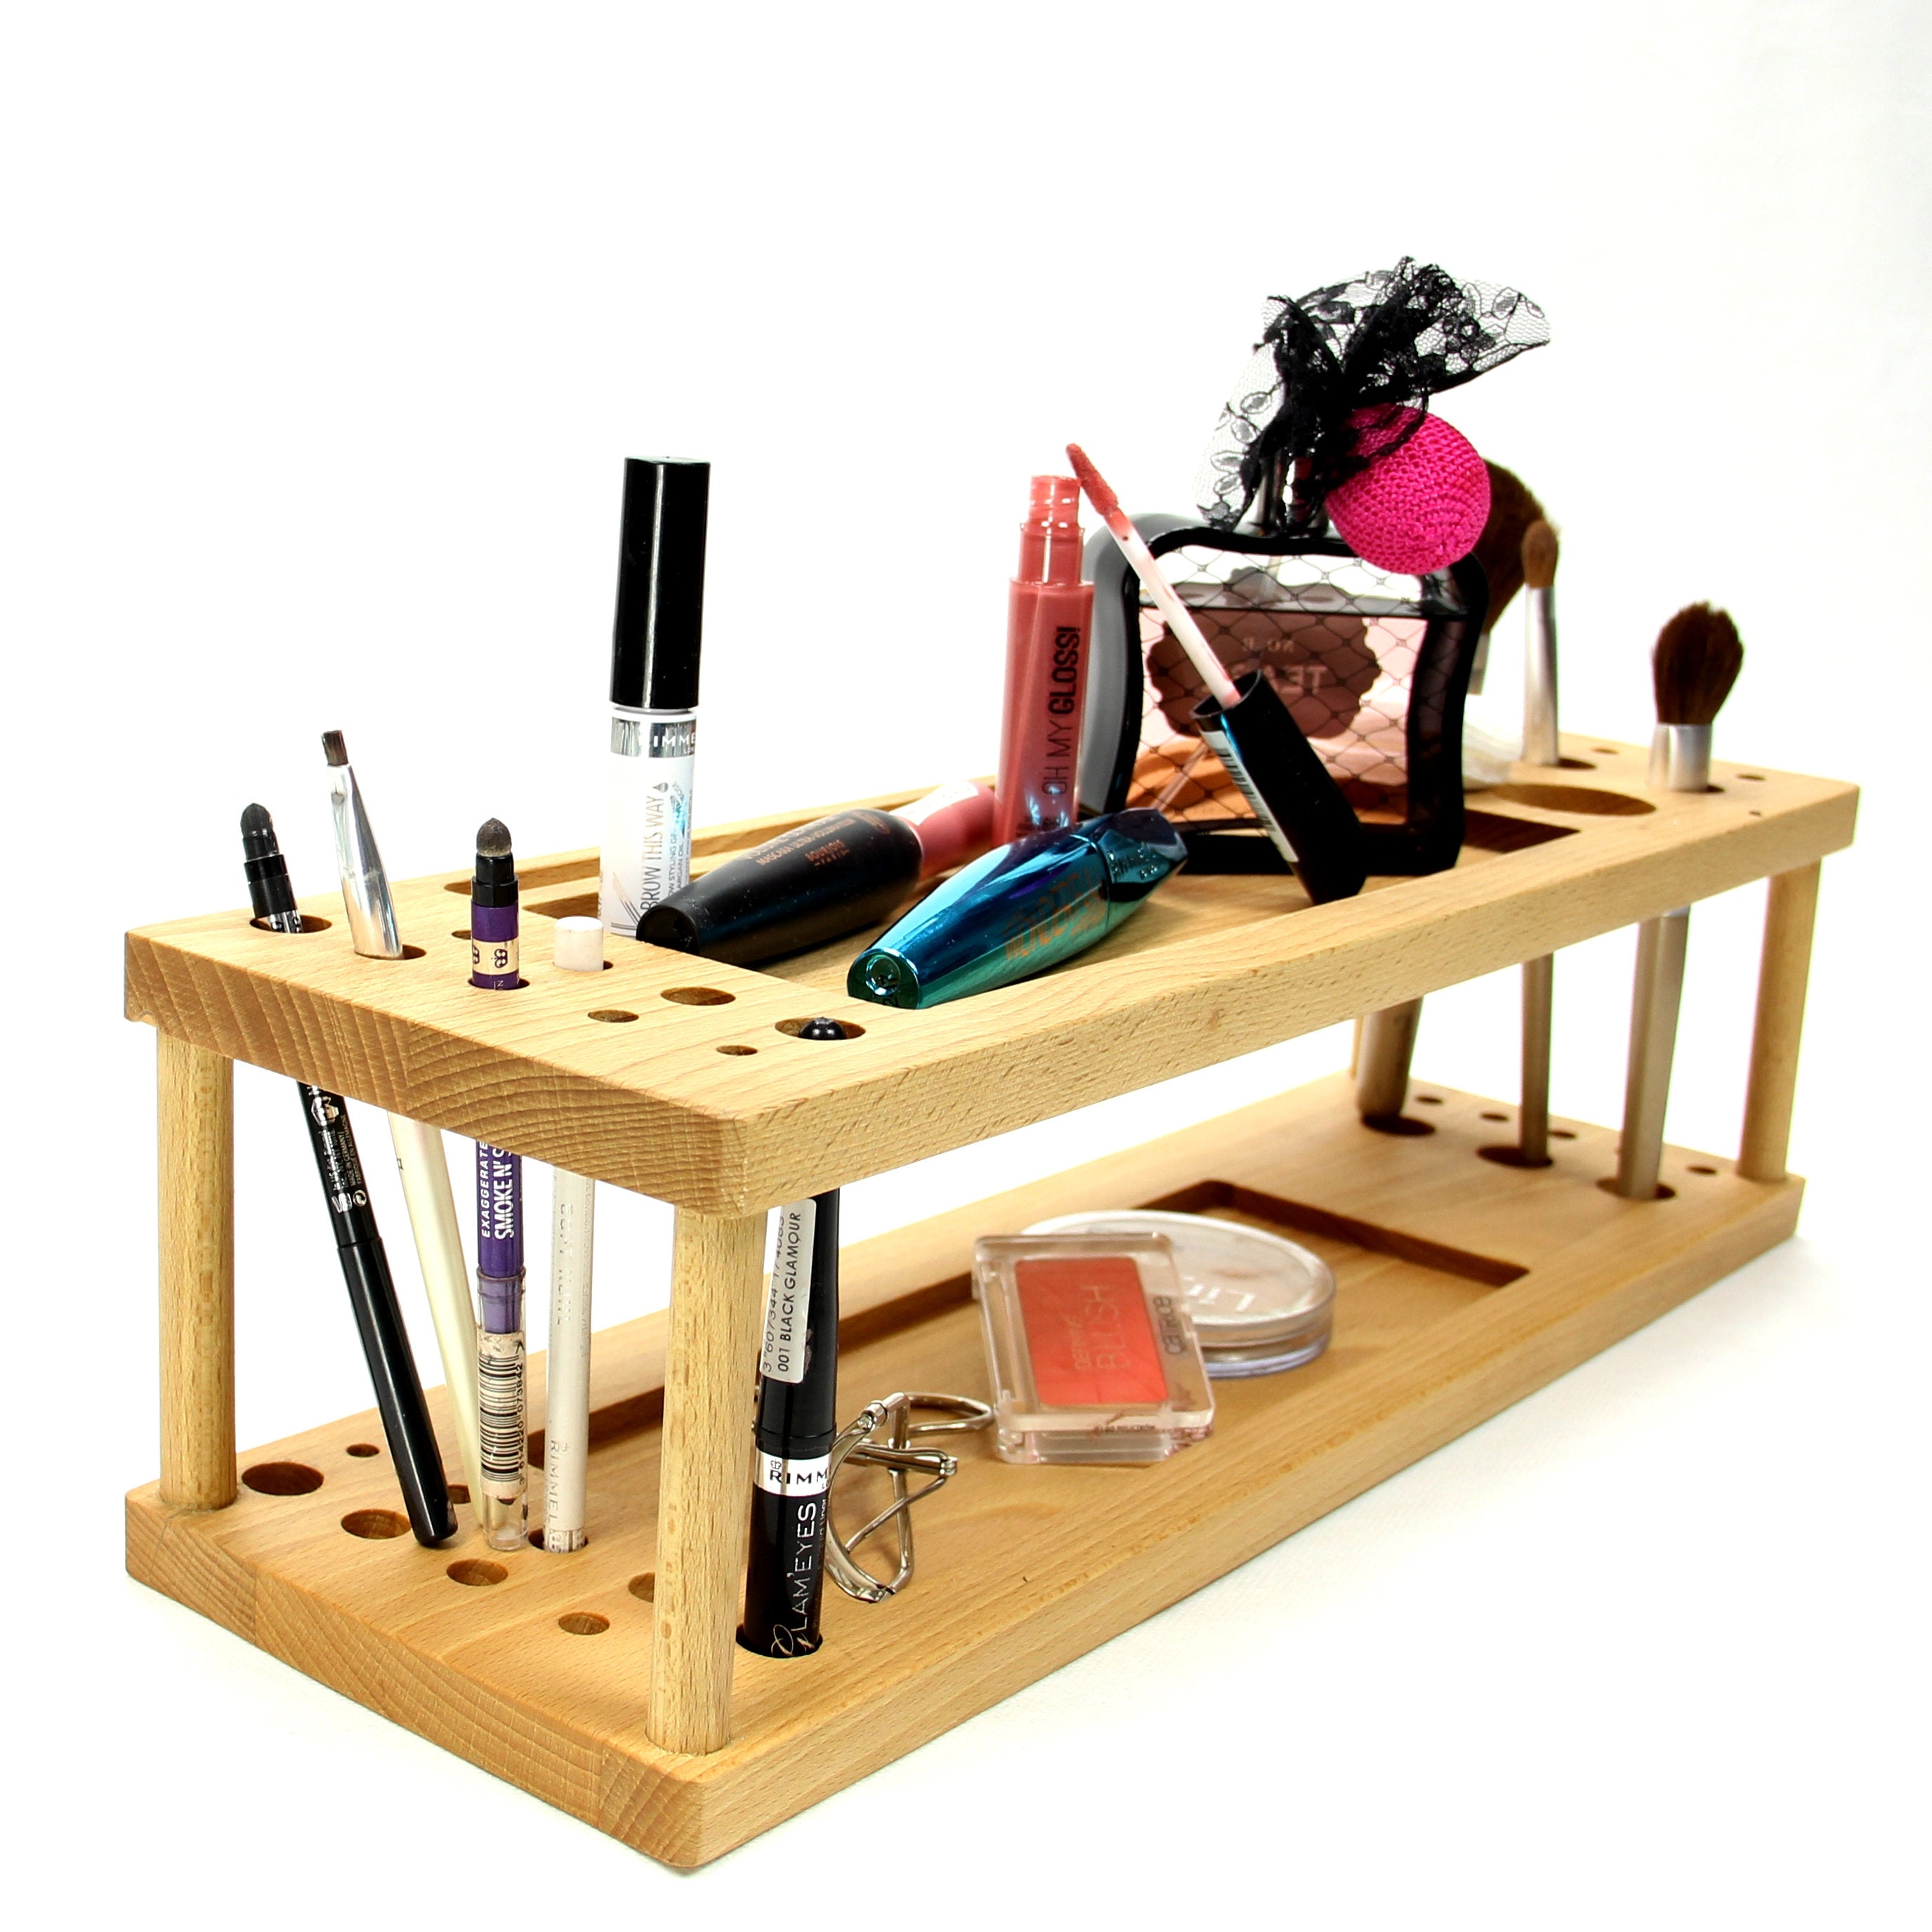 Cosmetics And Makeup Wood Organizer Holder For Dressing Table Or Bathroom - Will Hold Everything In One Place Including Jewellery And Phone